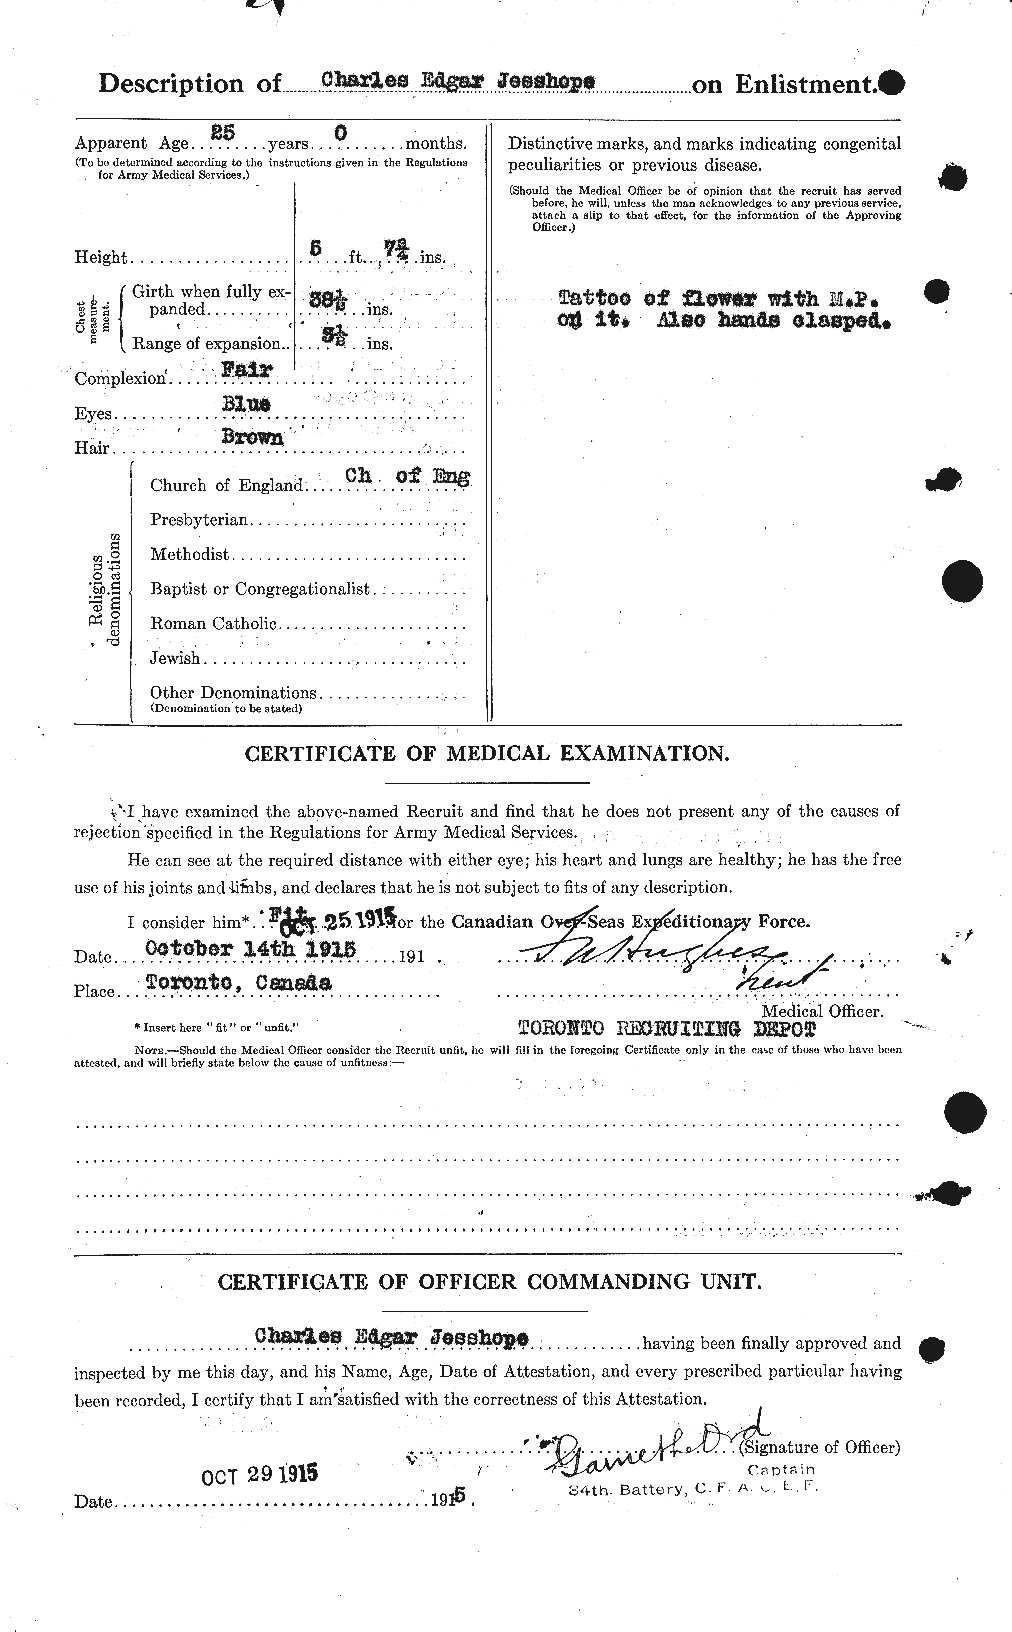 Personnel Records of the First World War - CEF 418437b